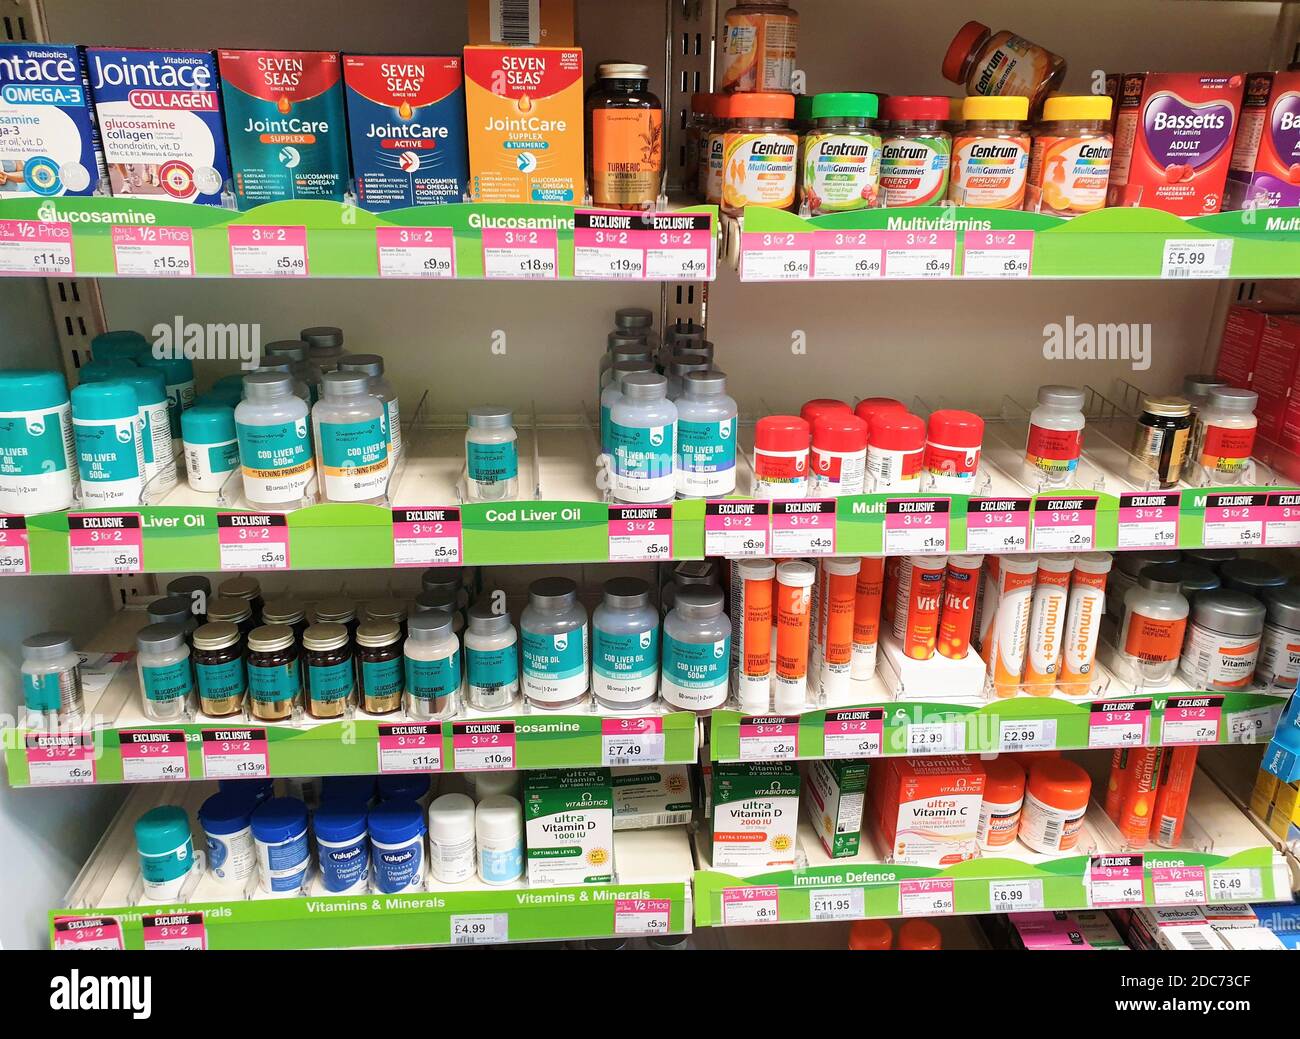 Interior of Superdrug store with display of Vitamins. Stock Photo